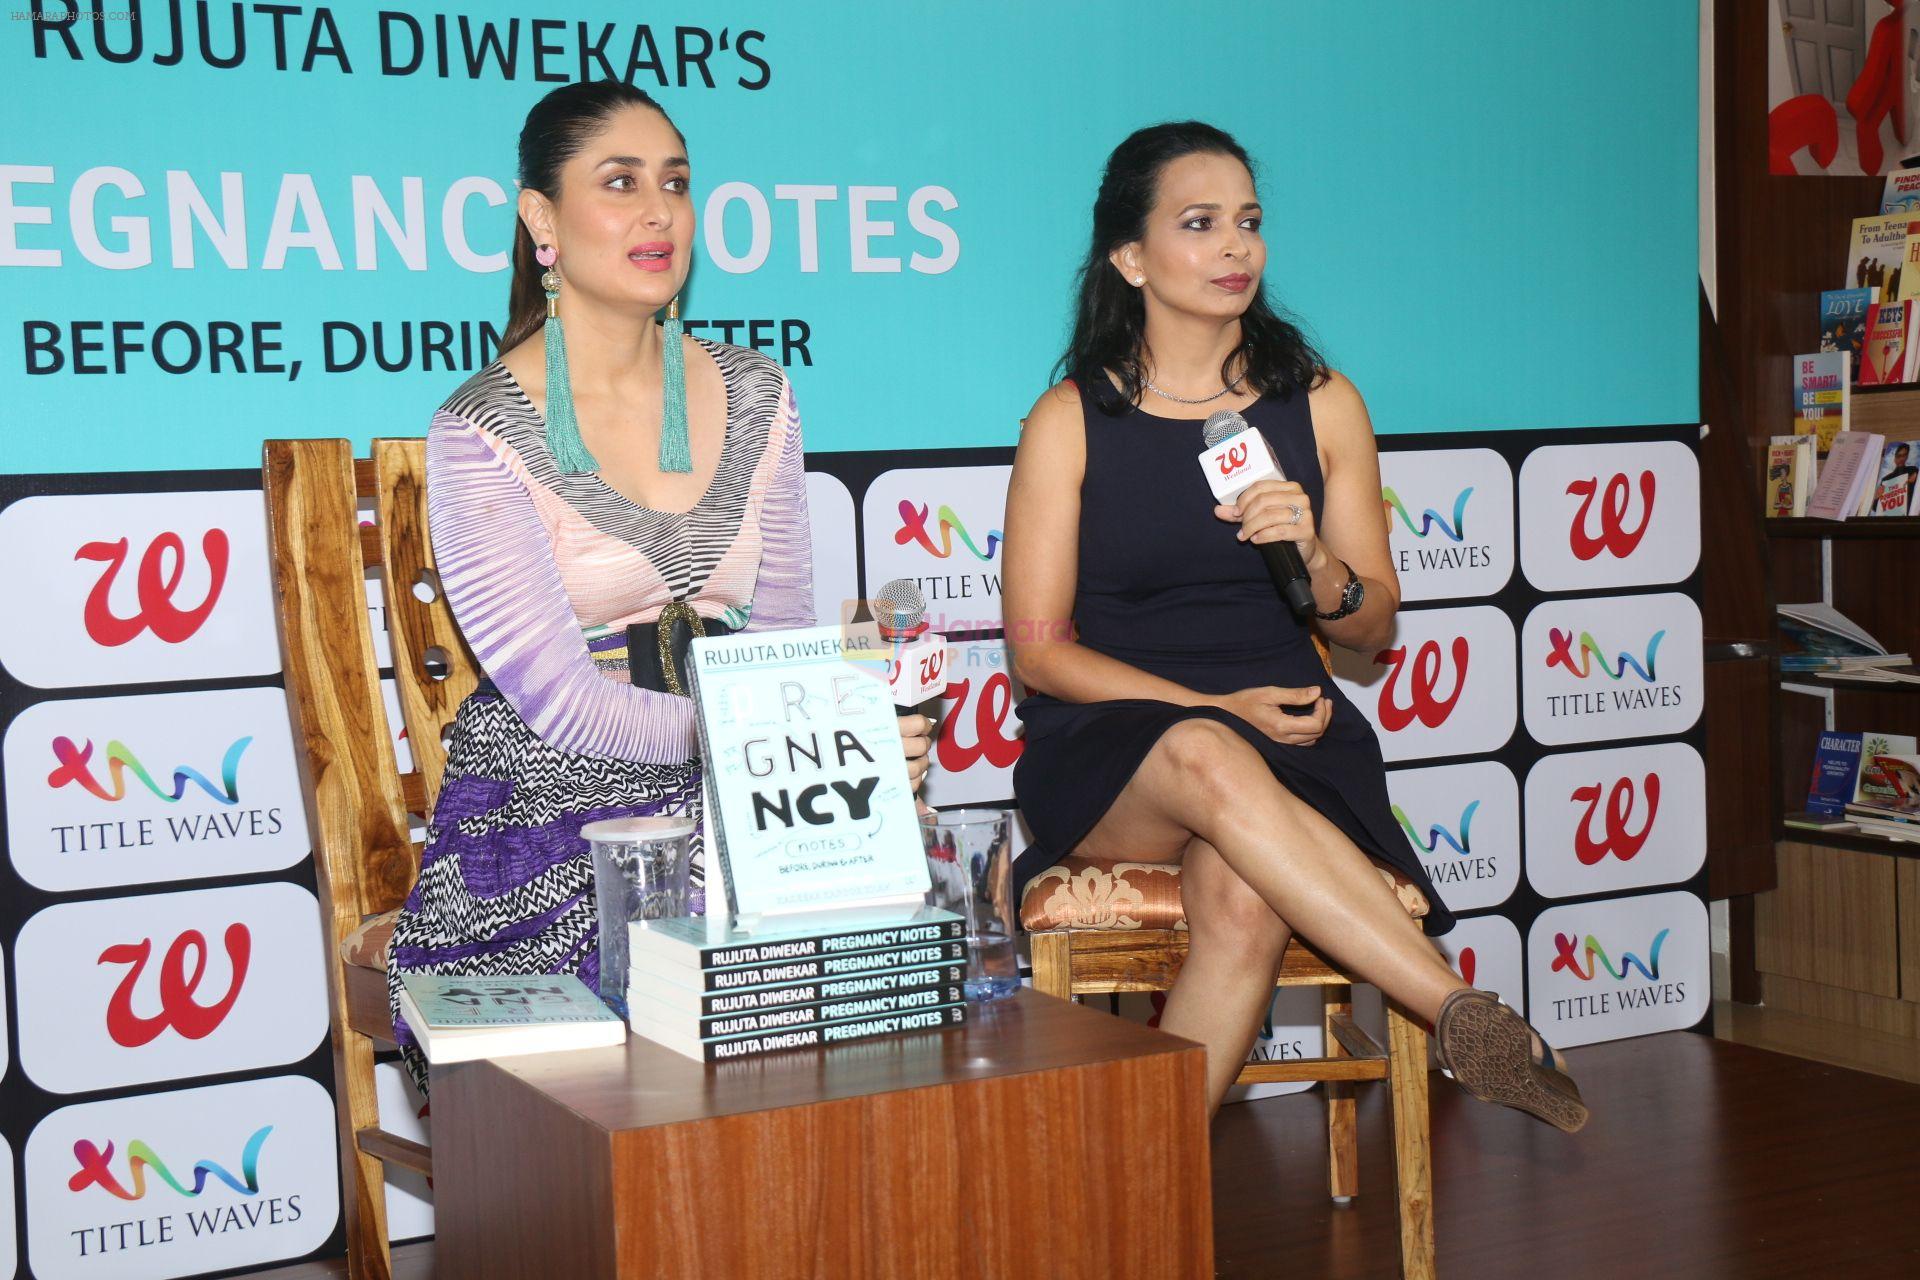 Kareena Kapoor Khan, Rujuta Diwekar at the Launch of book Pregnancy Notes Before During and After on 15th July 2017